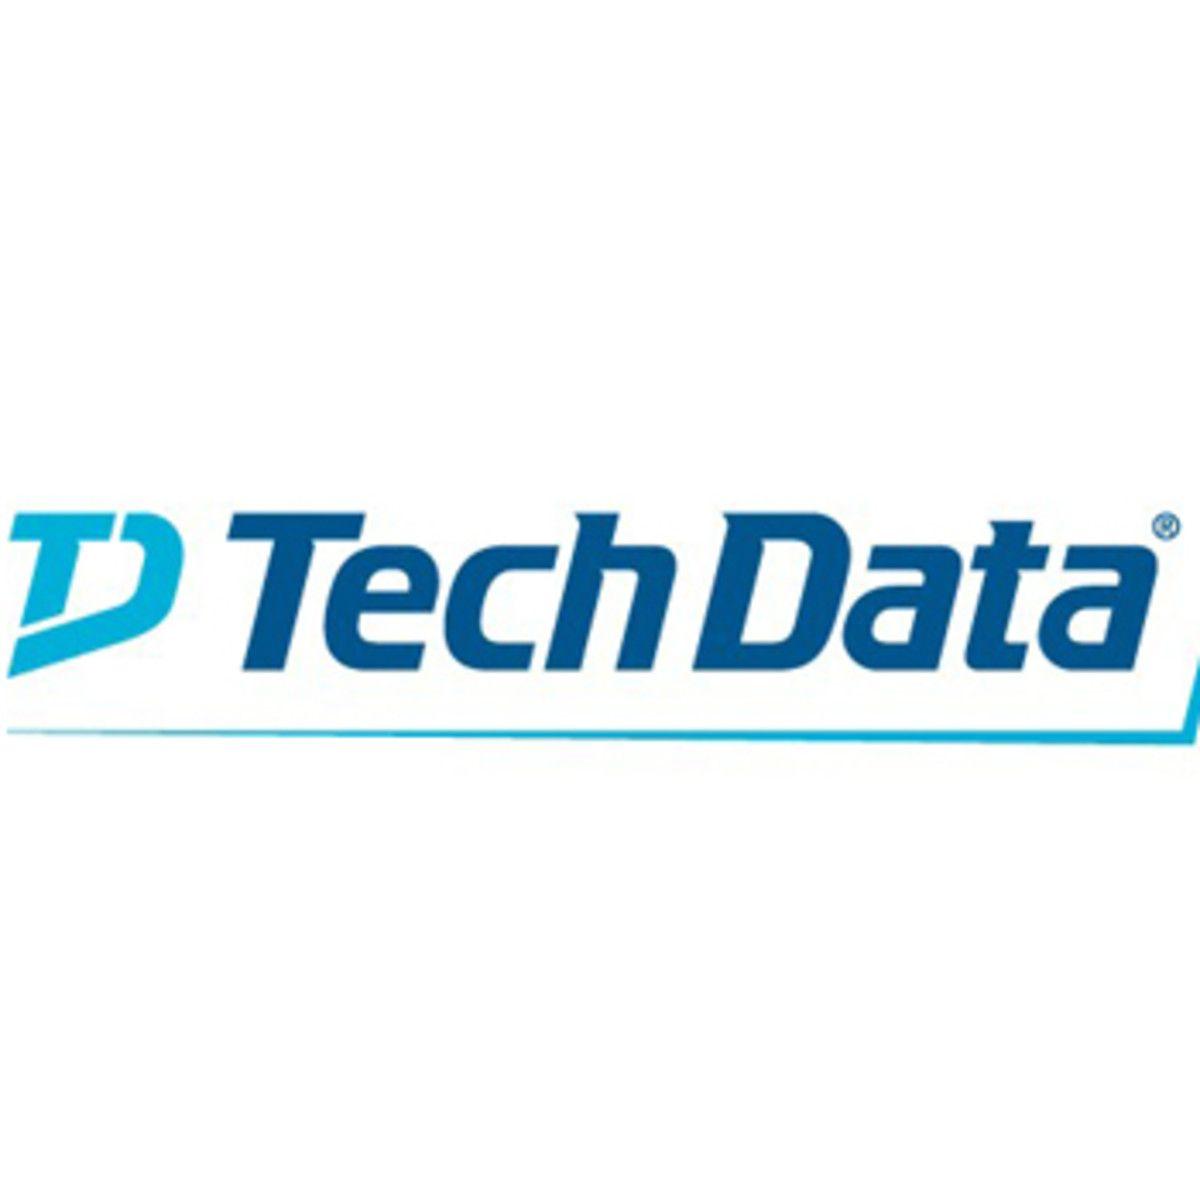 Parallels Logo - Tech Data's Parallels partnership to help resellers grow Workspace ...